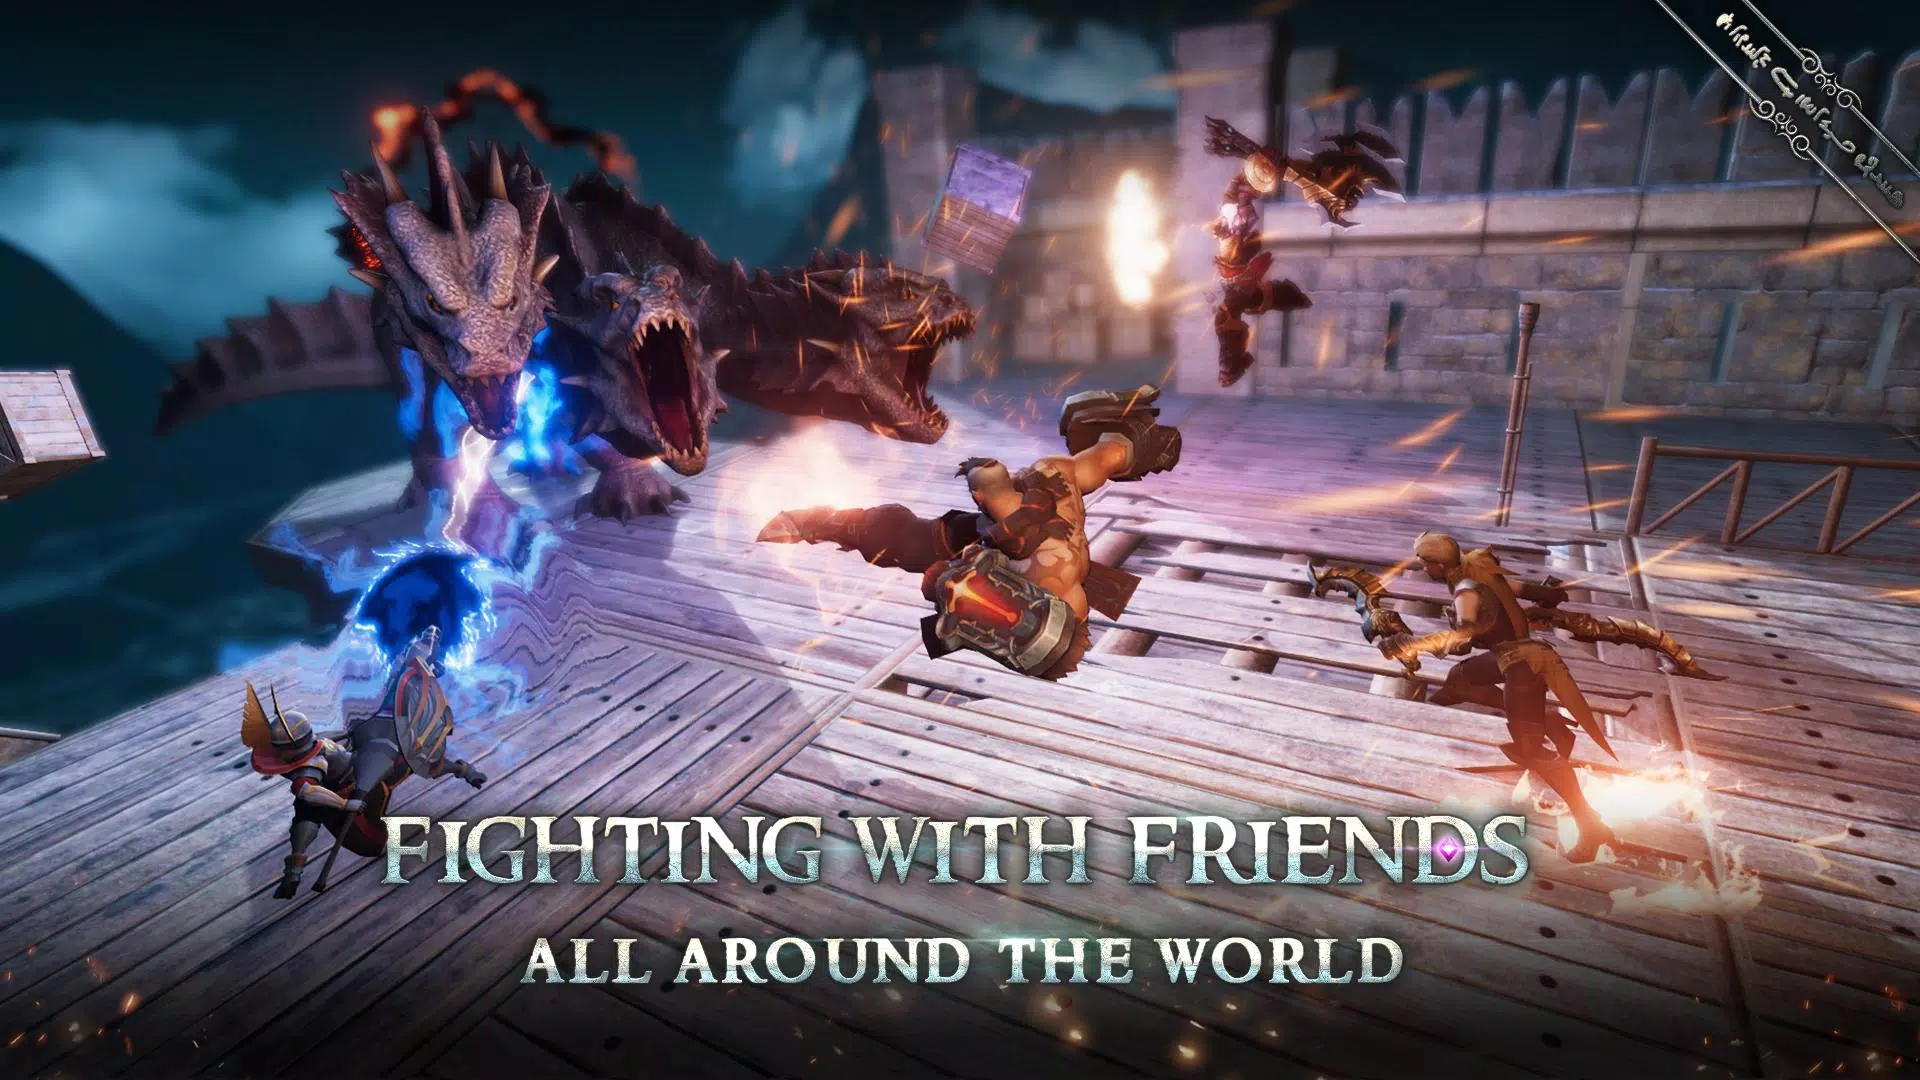 Overlord's Odyssey Gameplay - RPG Game Android APK Download 